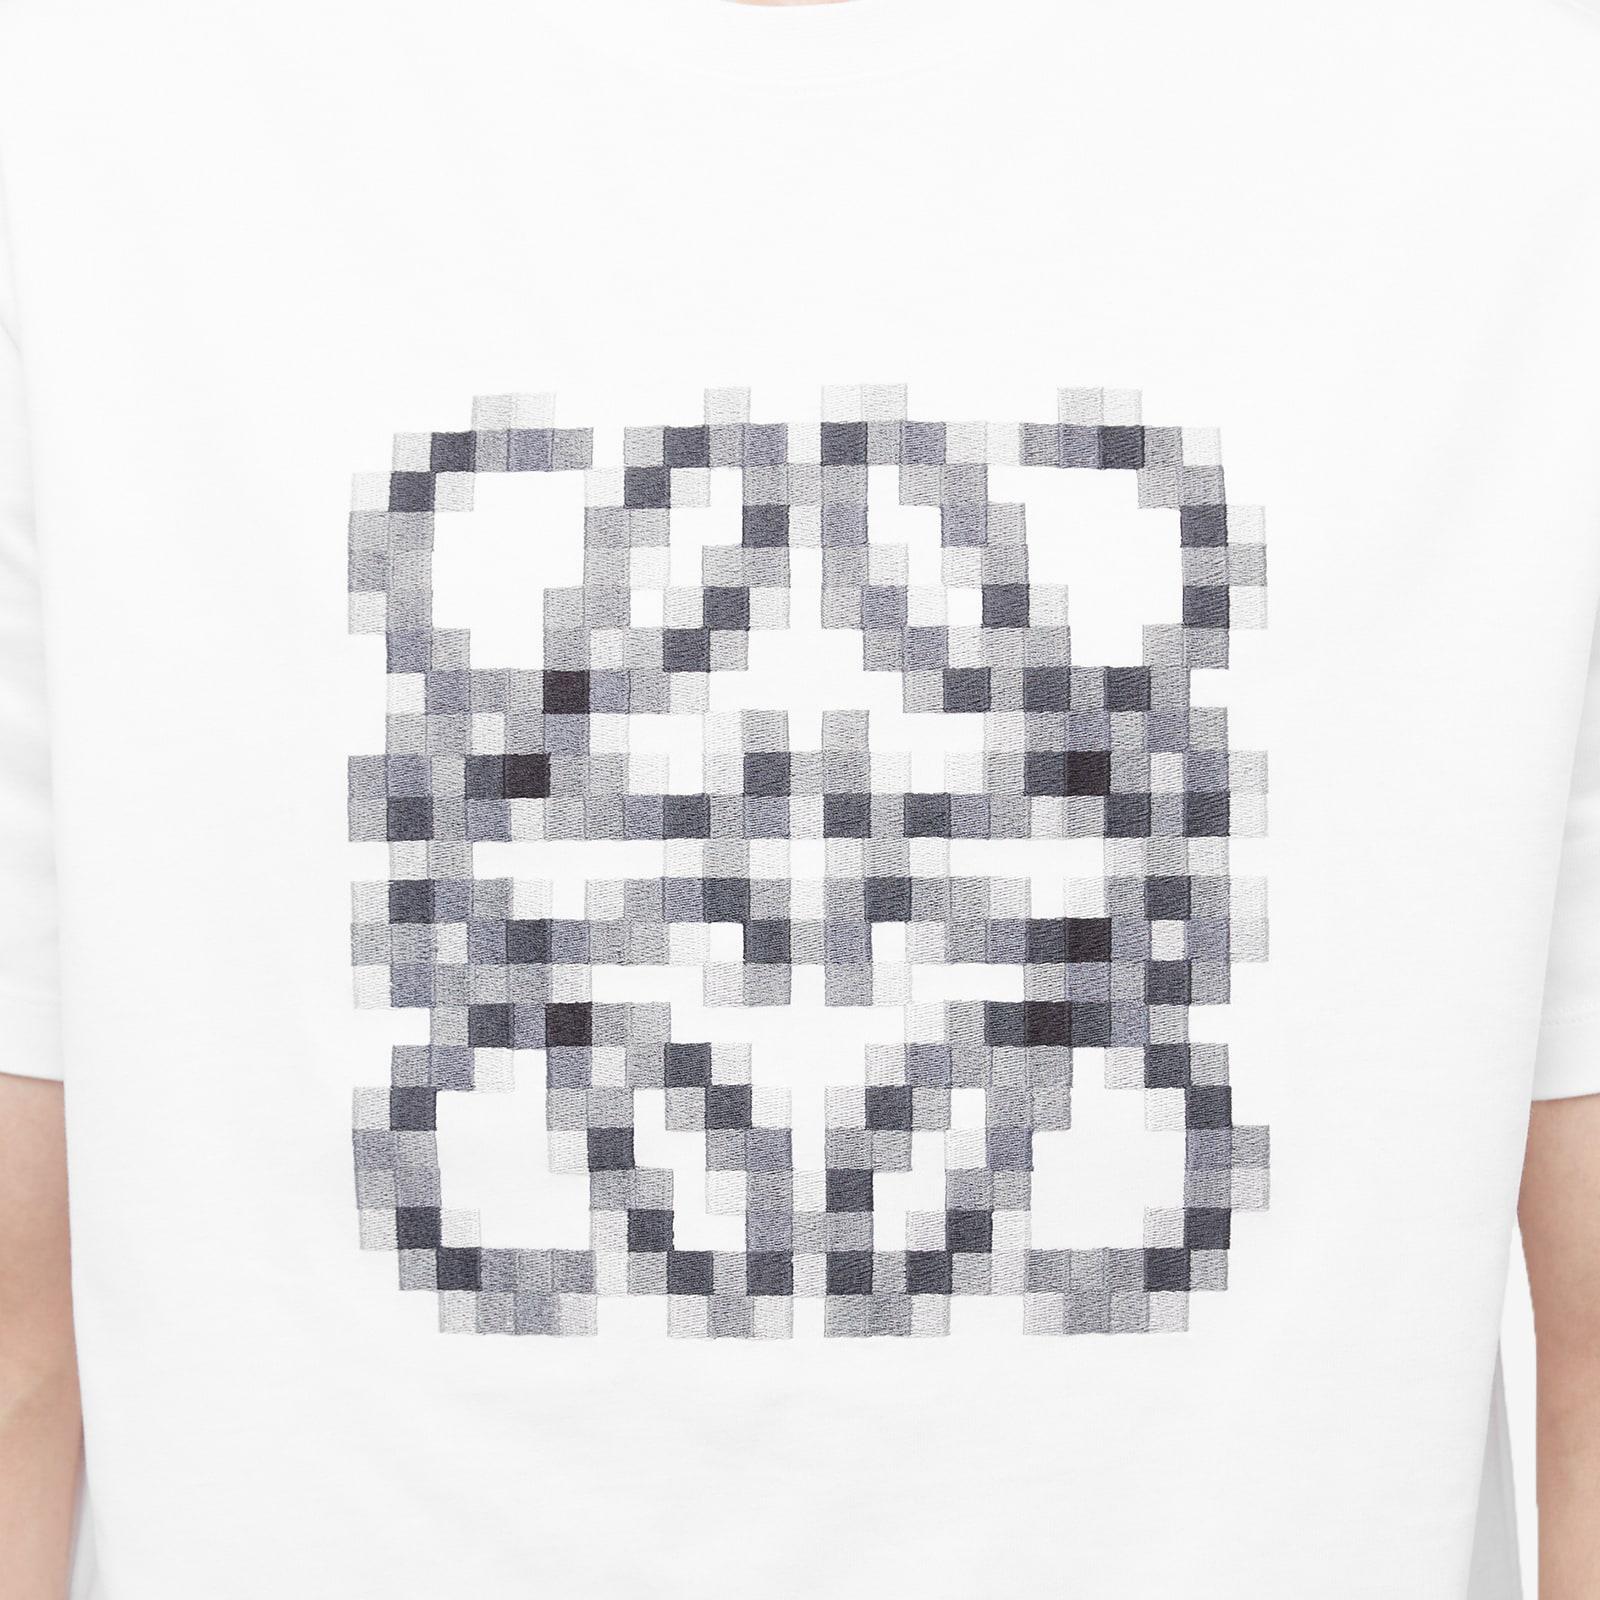 Loewe Men's Anagram Pixelated T-Shirt in White, Size L | End Clothing